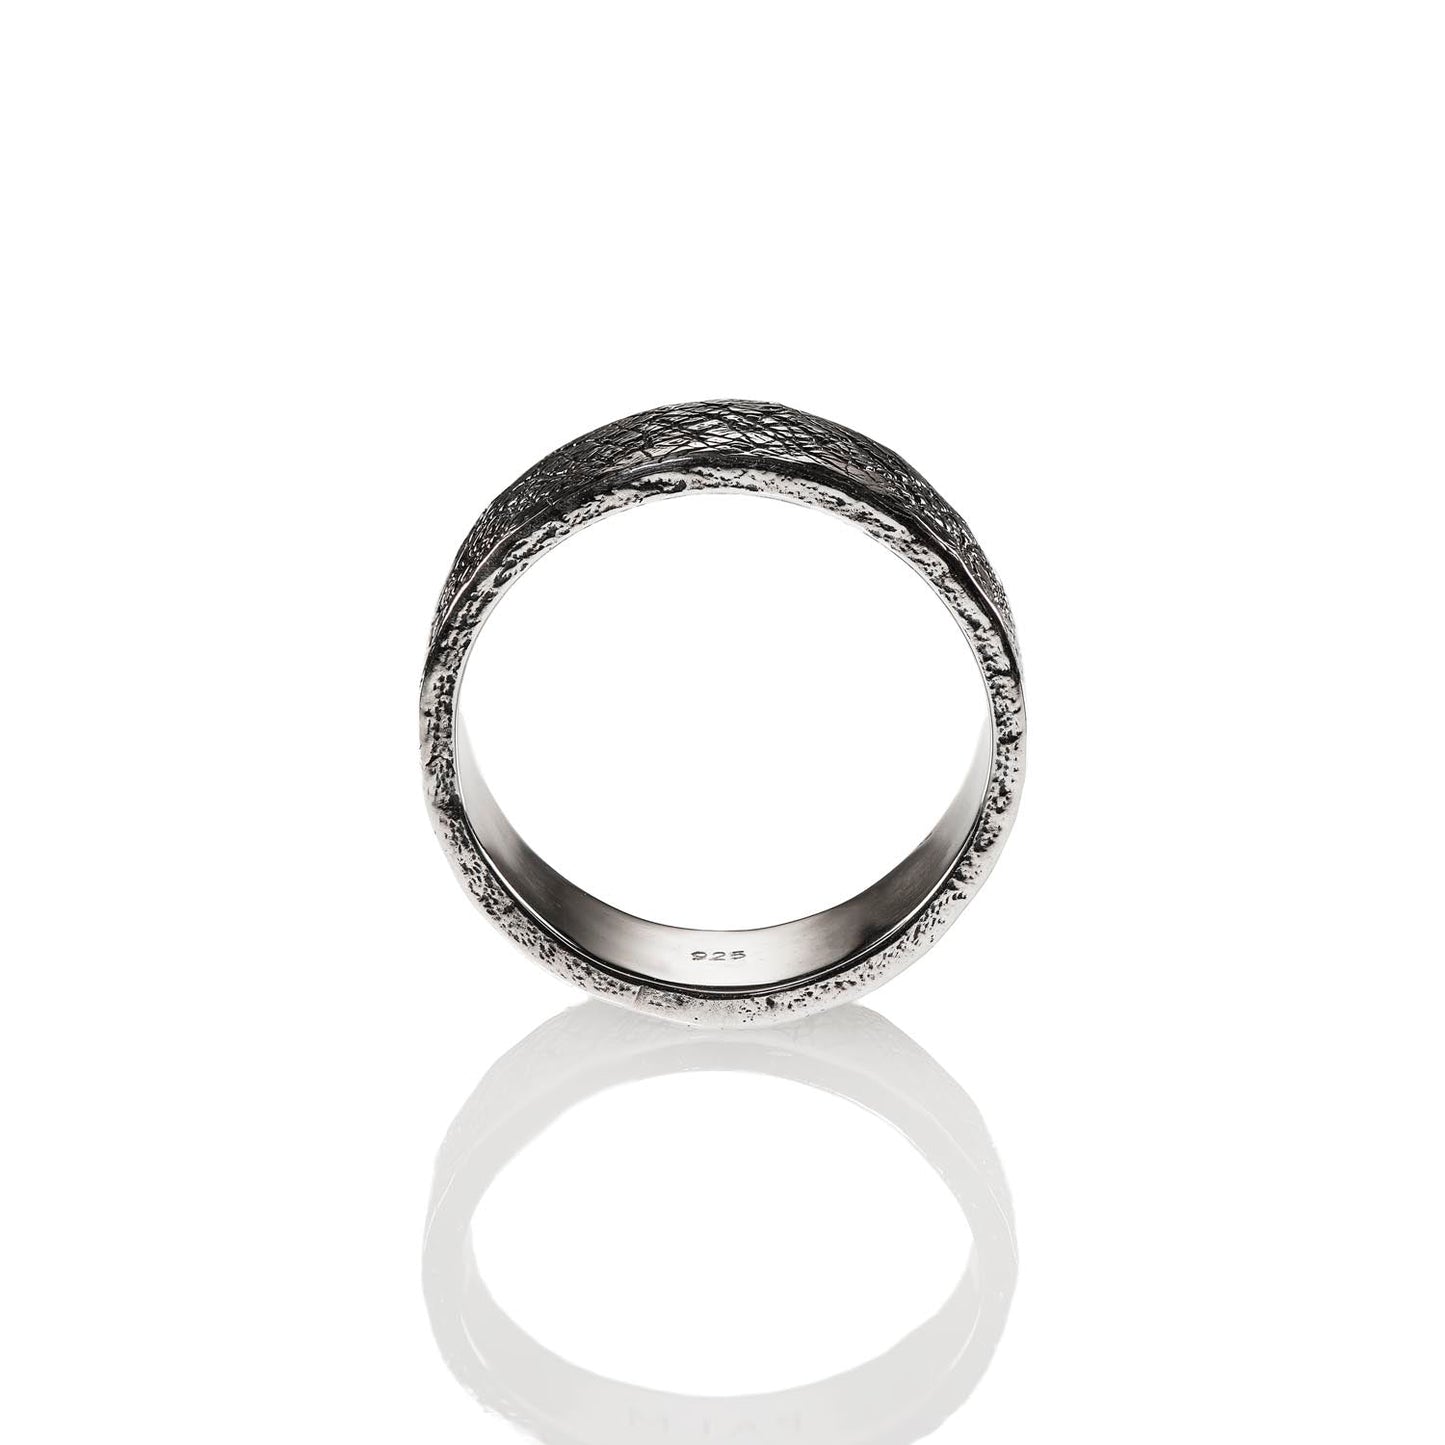 NOX RING LARGE. - Minimalistic 925 Silver Ring 8mm - PALM. | Handcrafted Jewelry-